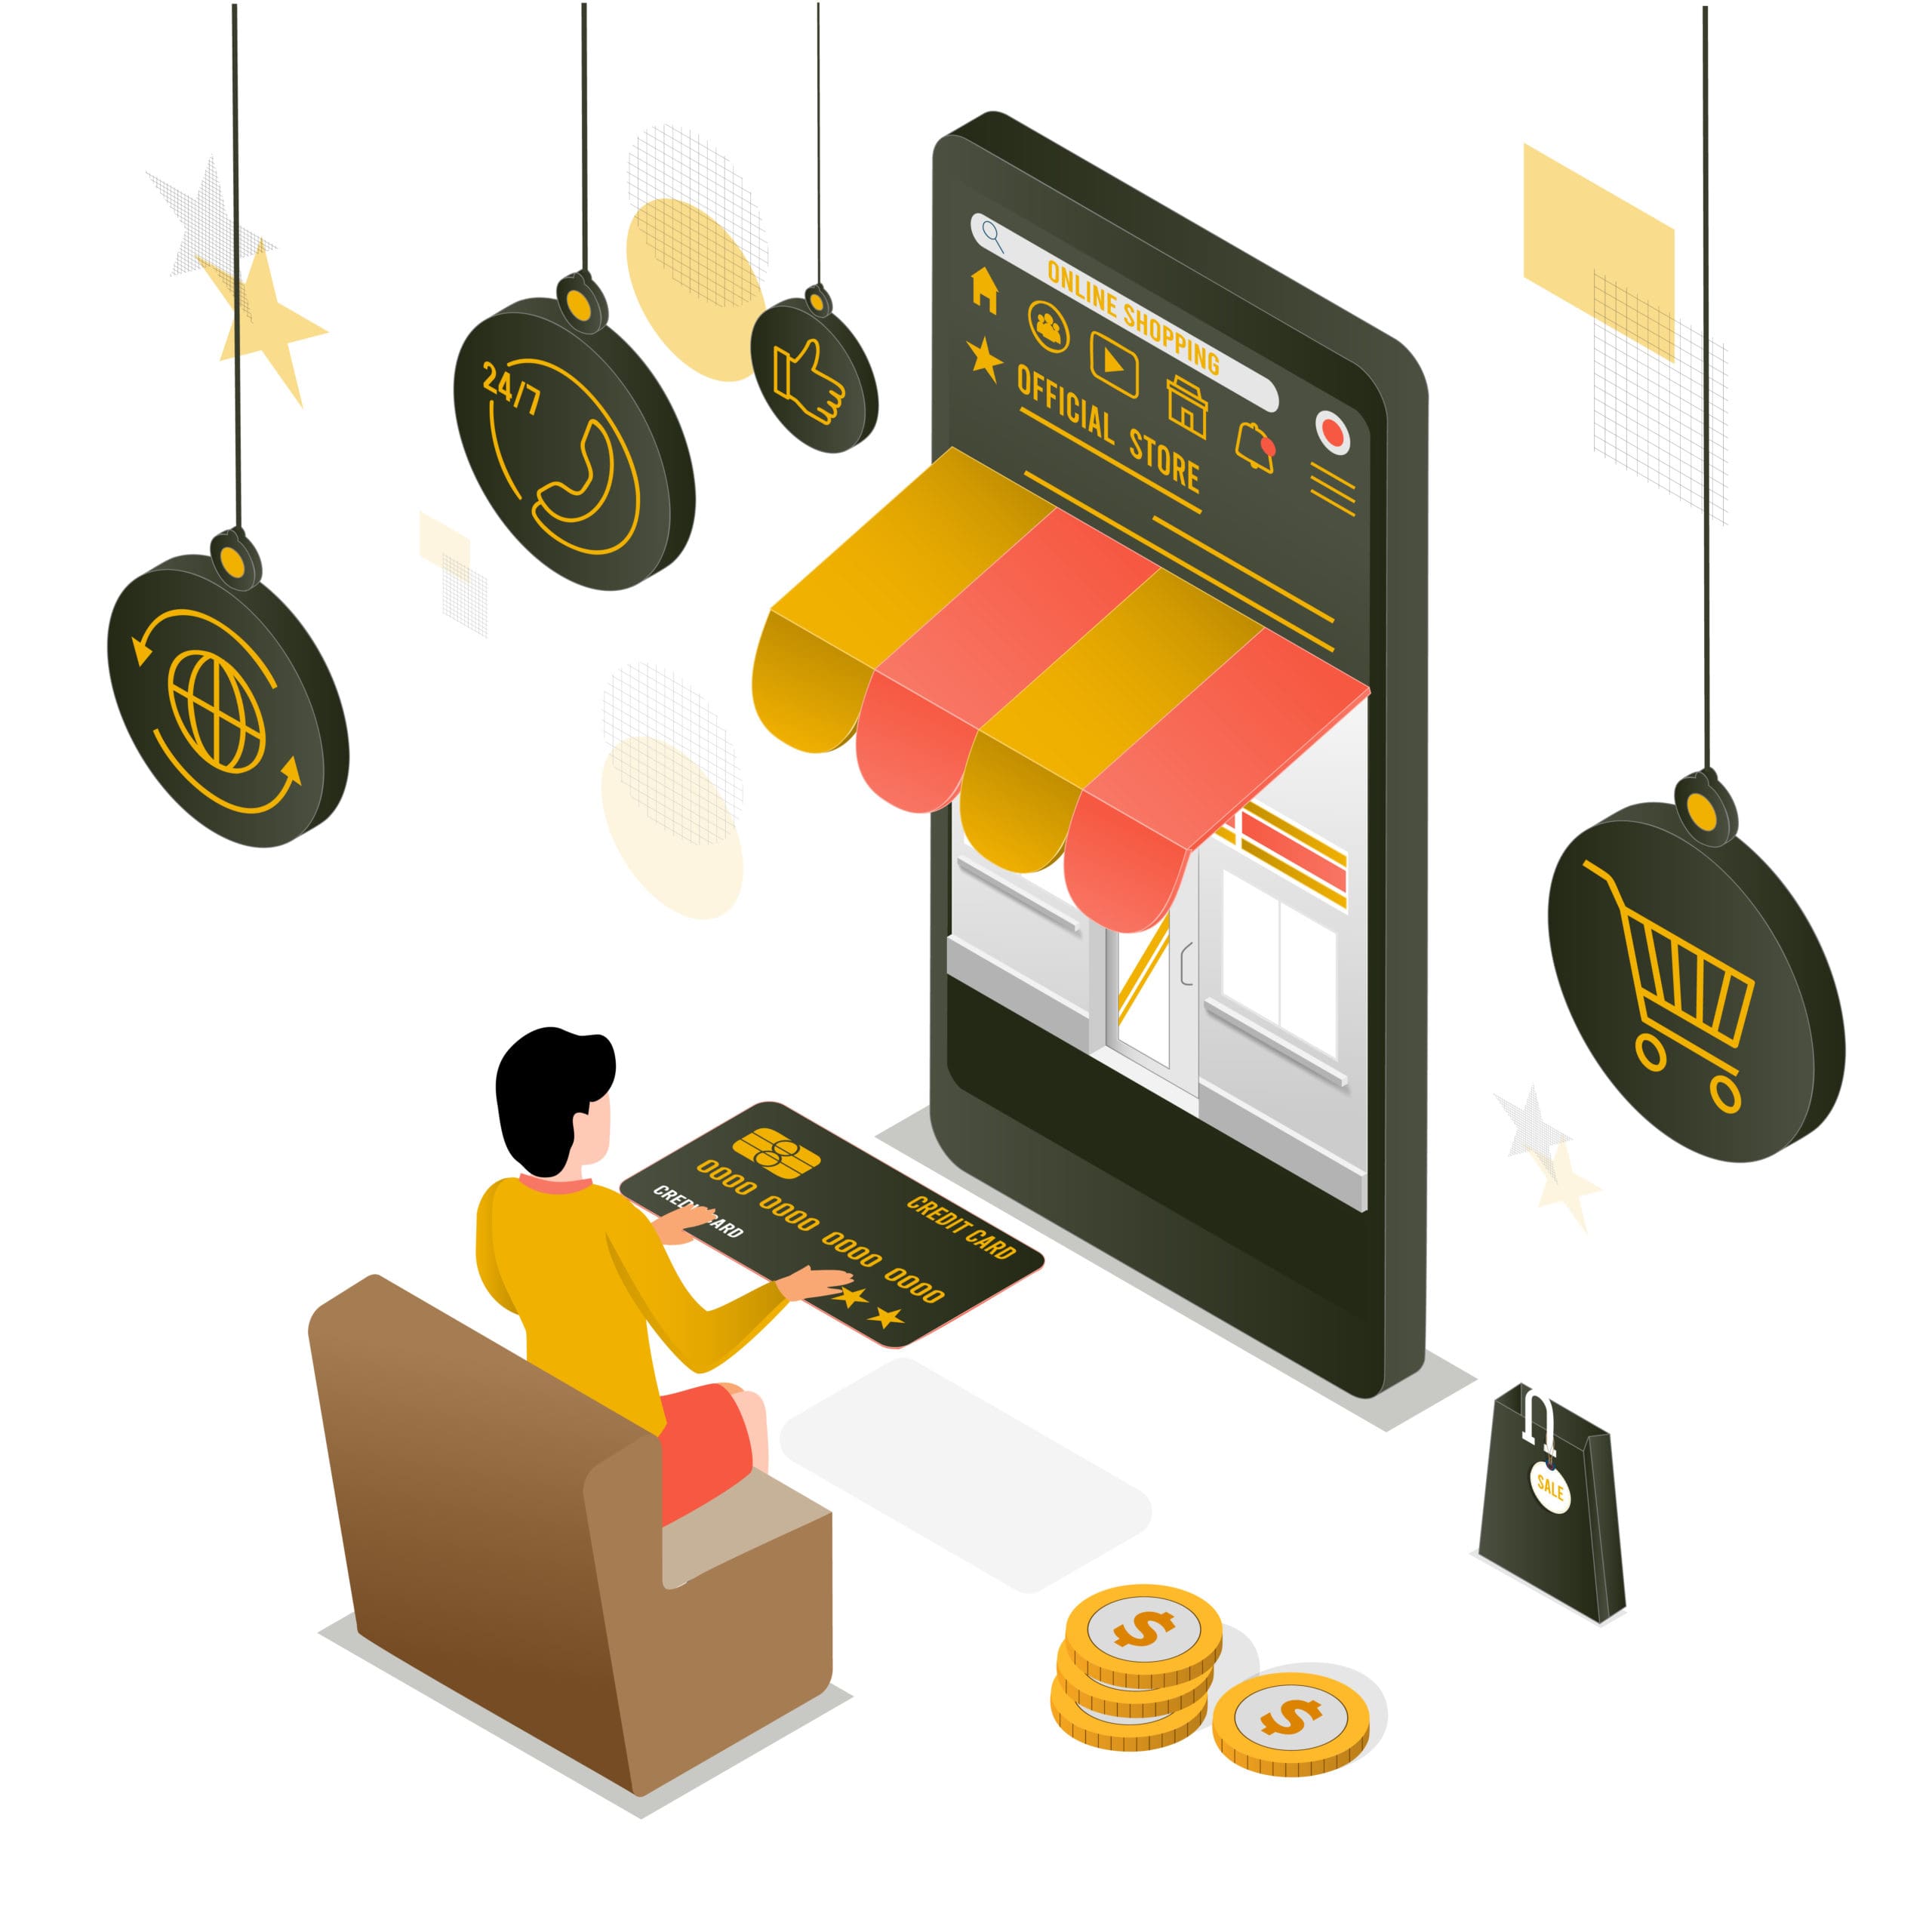 Ecommerce business solution